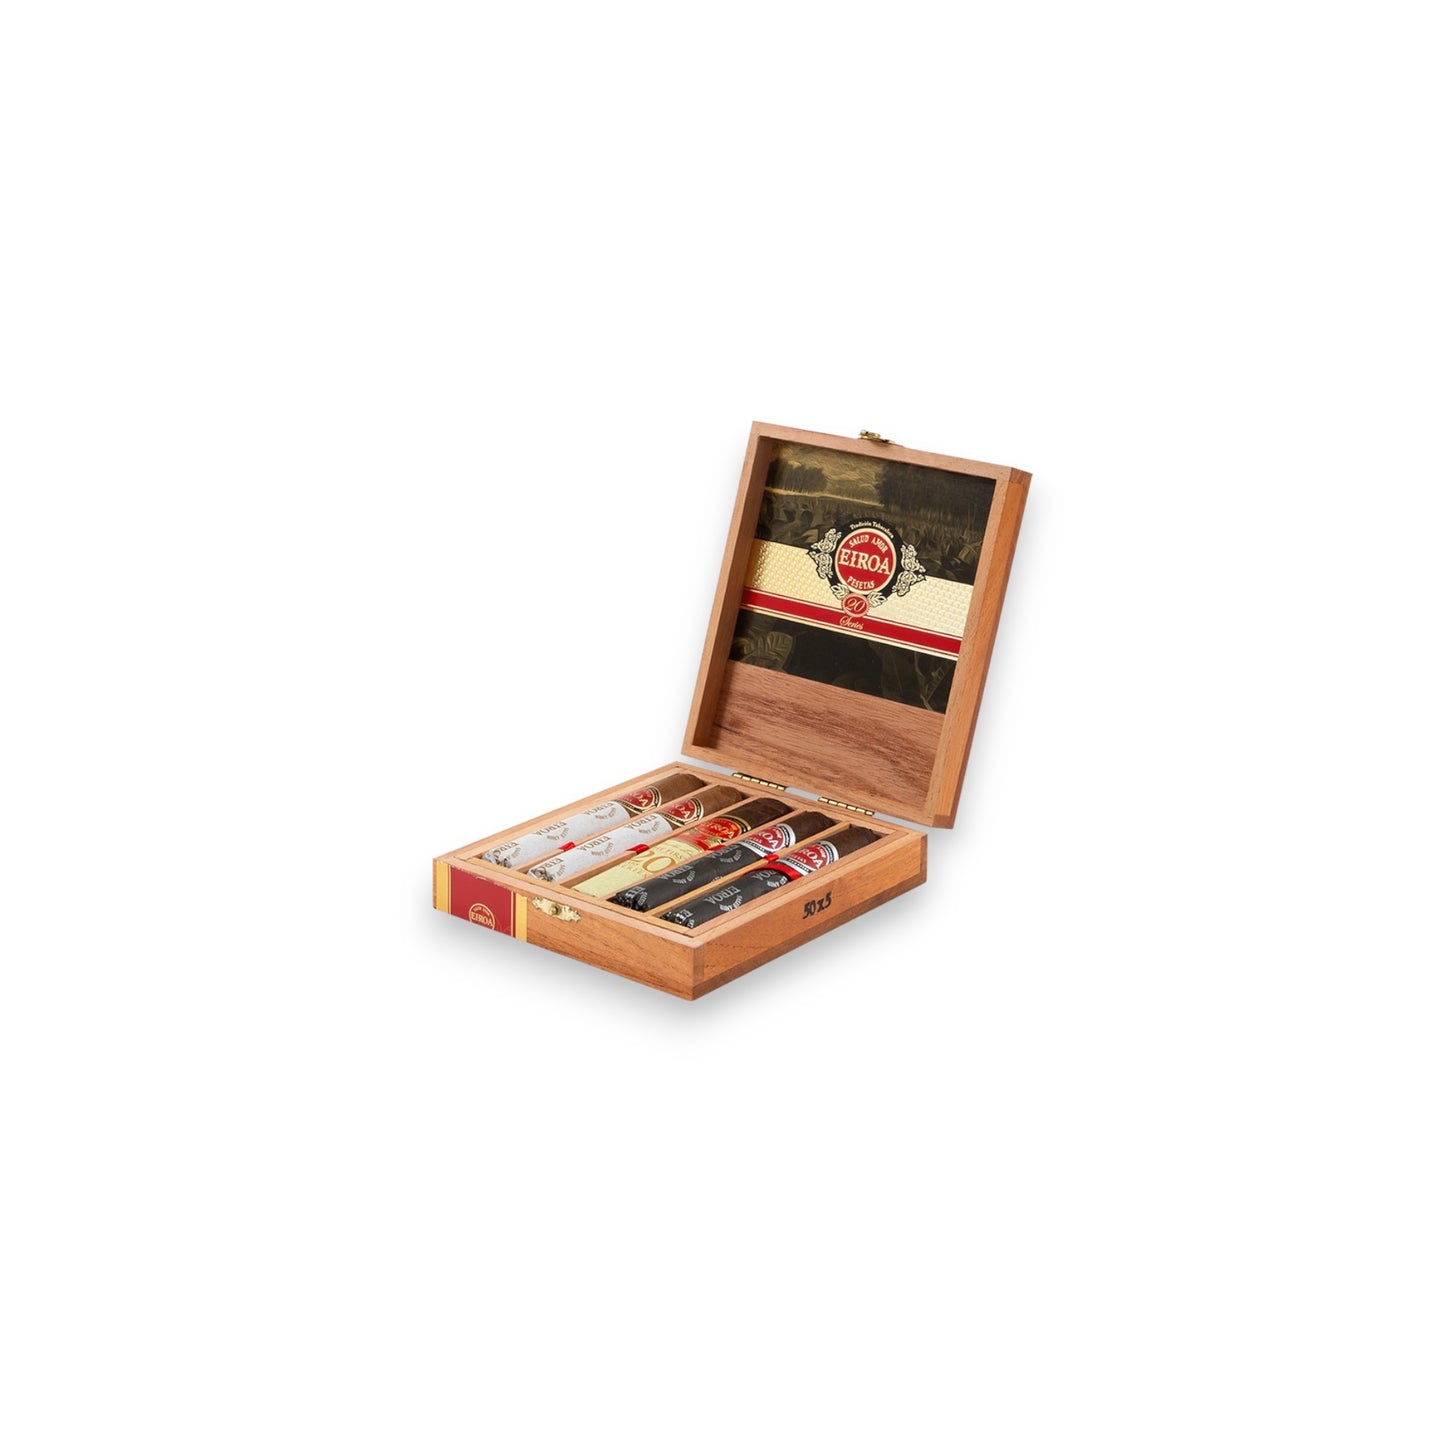 Eiroa The First 20 Years - Robusto Sampler